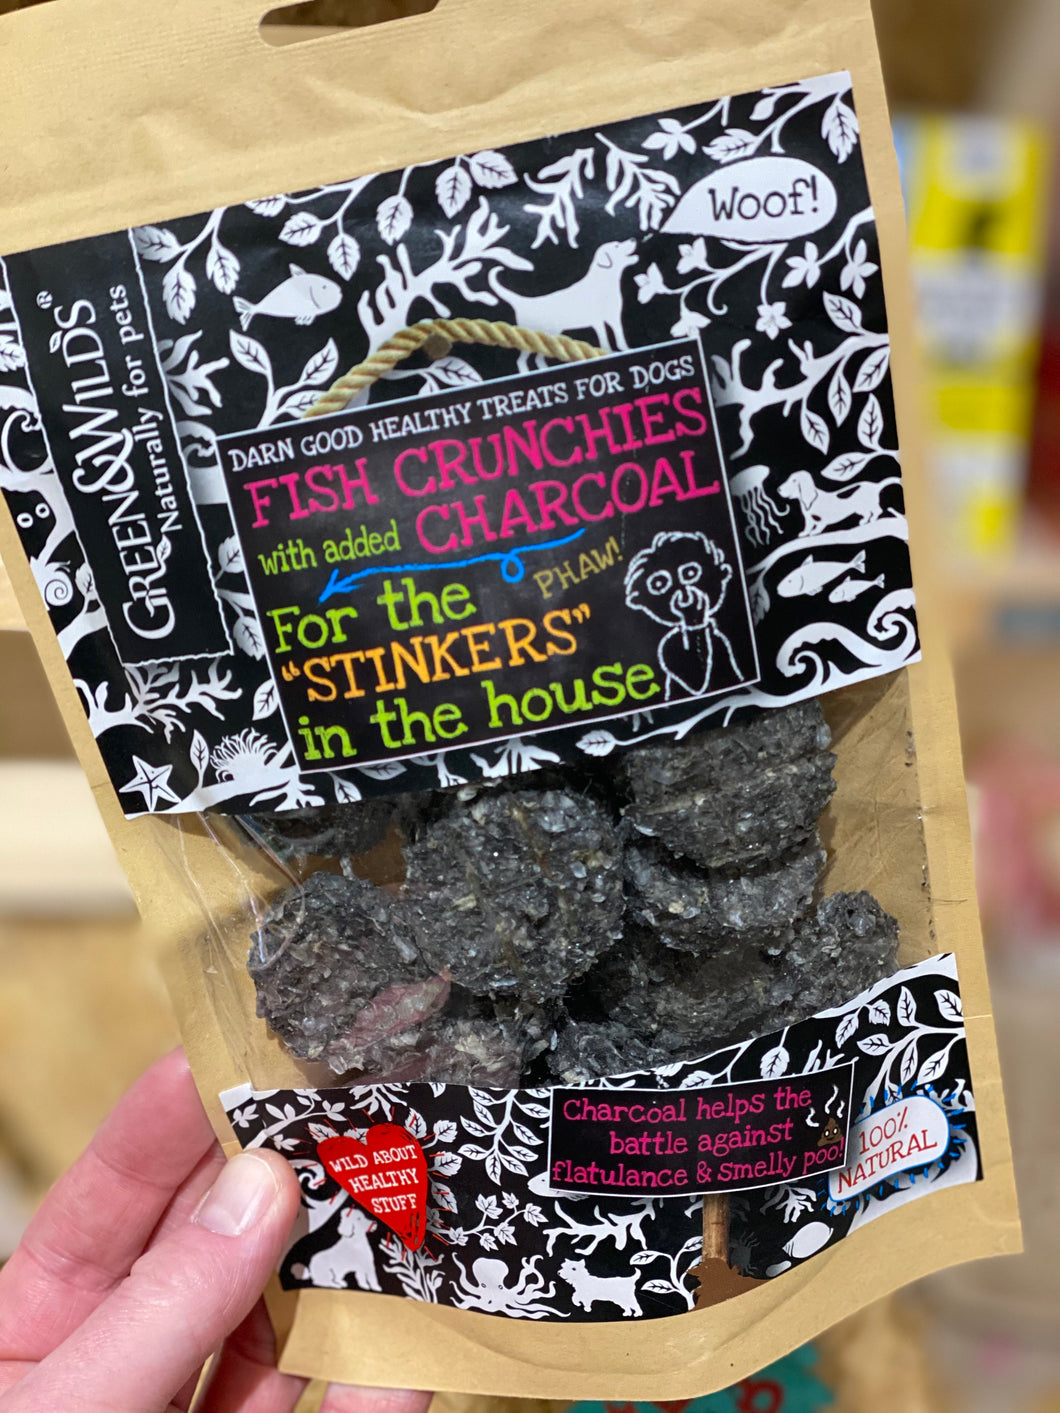 Fish crunchies (with charcoal)